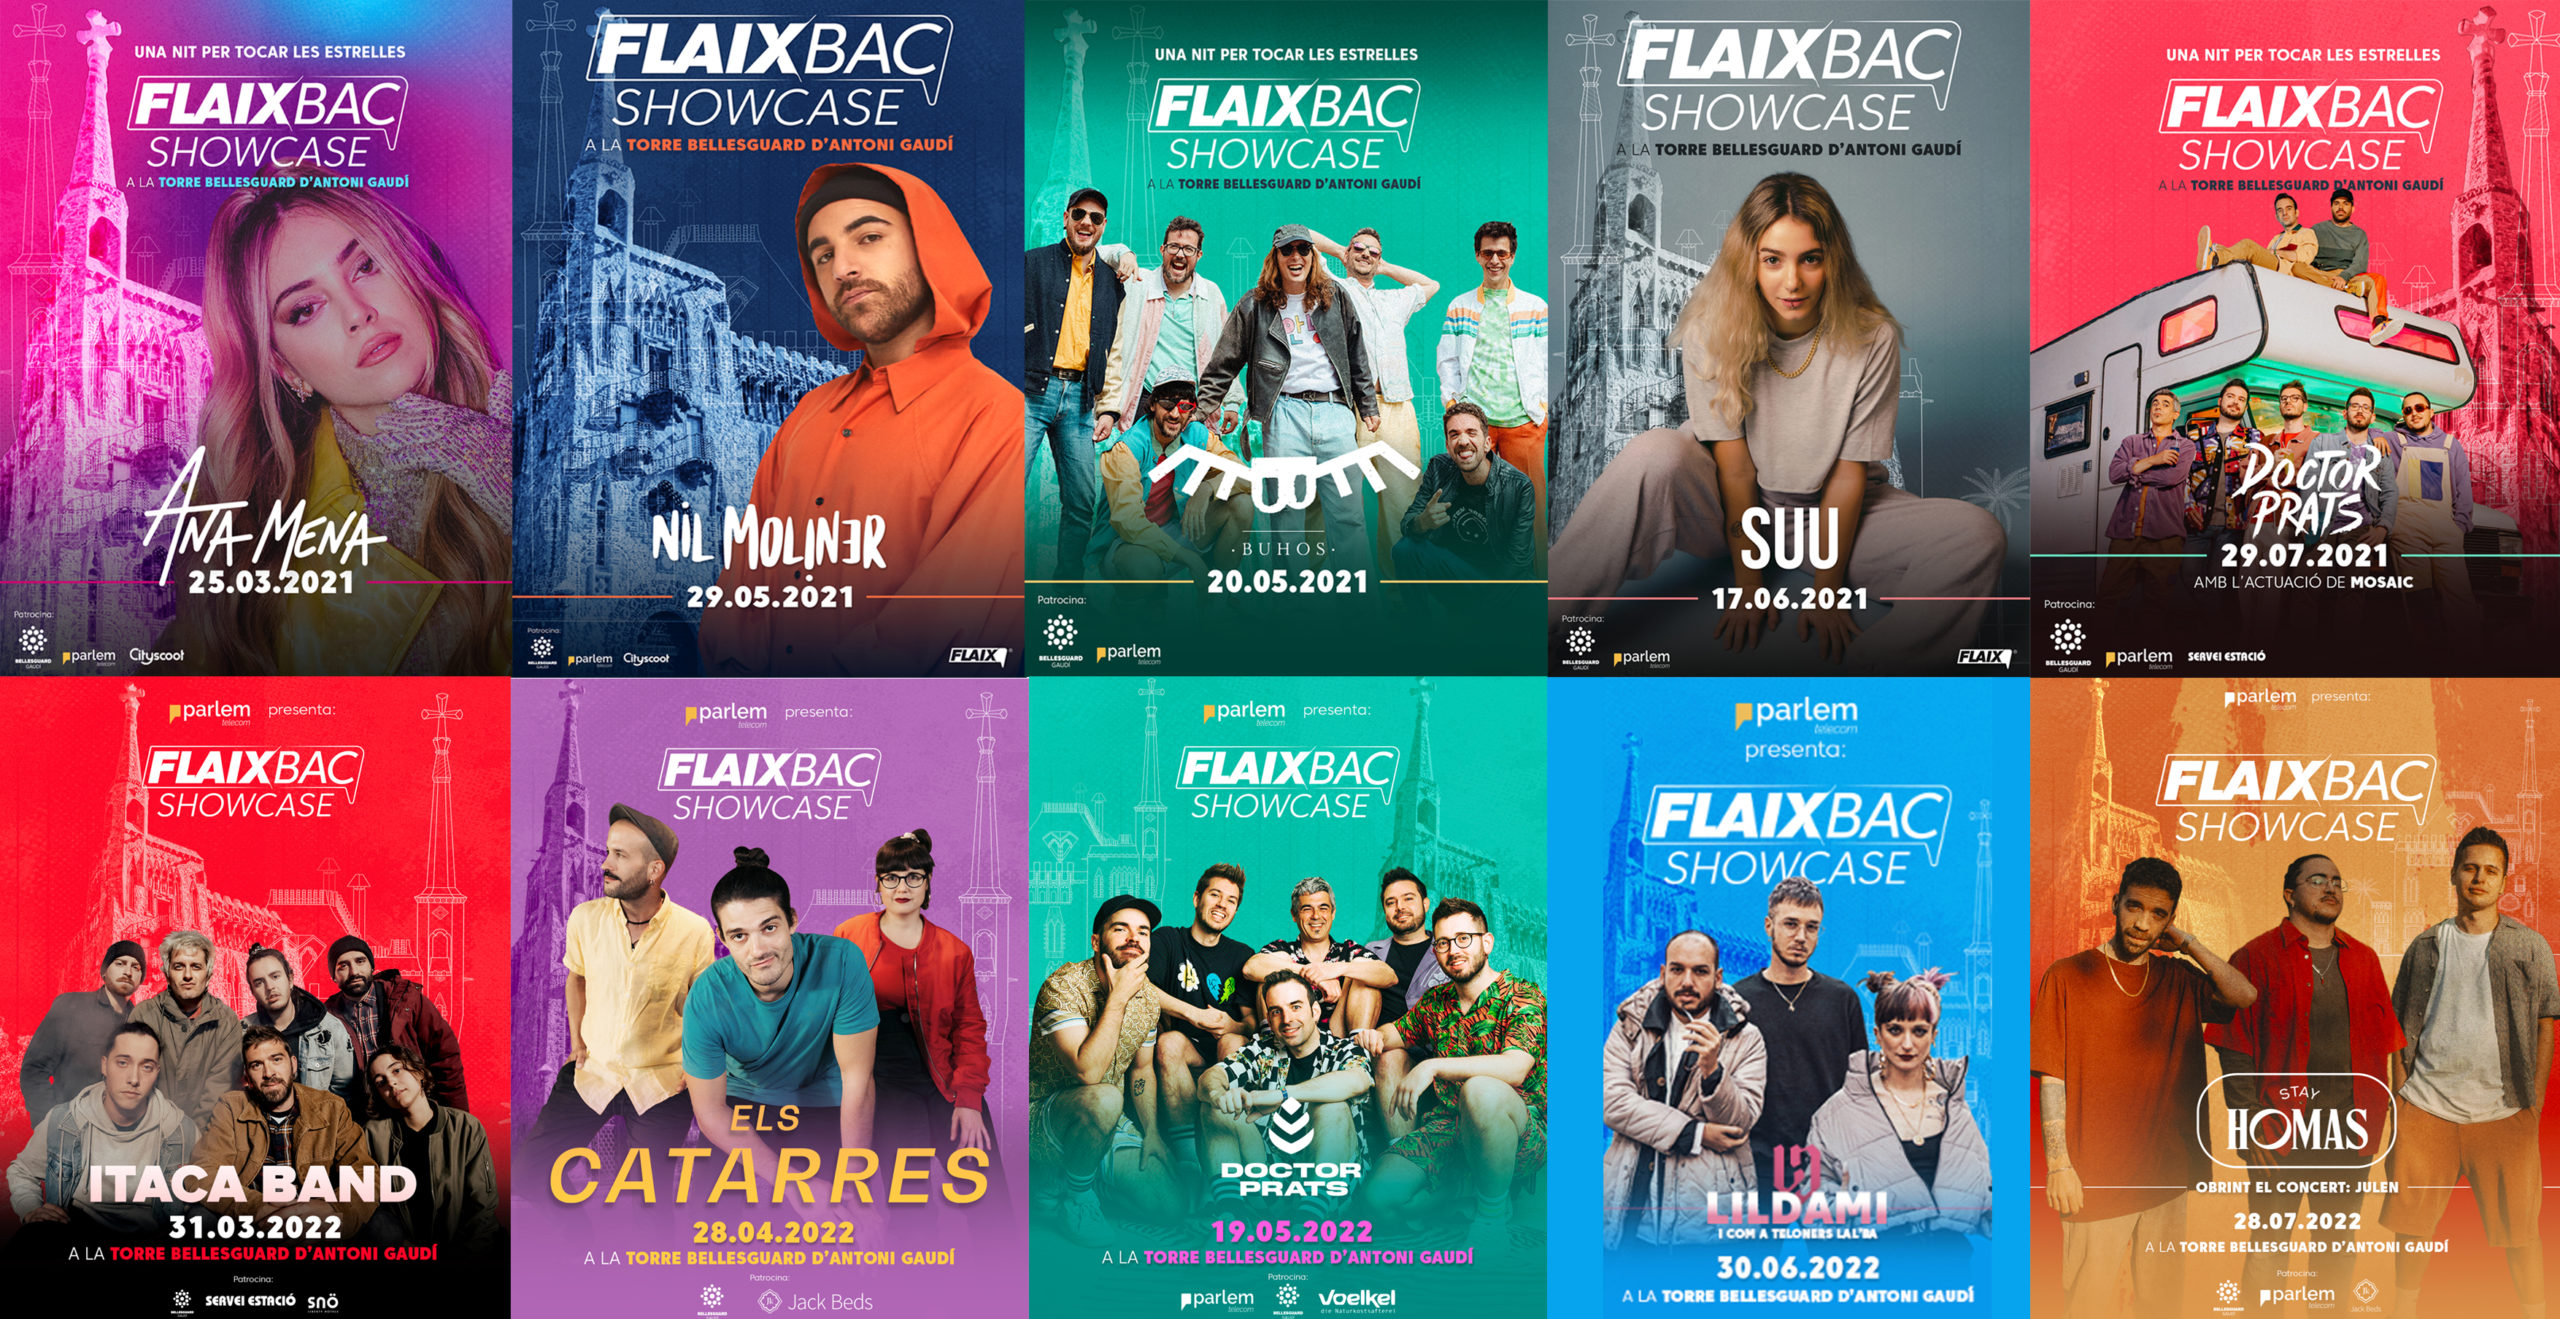 Did you know? Flaixbac Showcase Concerts at Torre Bellesguard